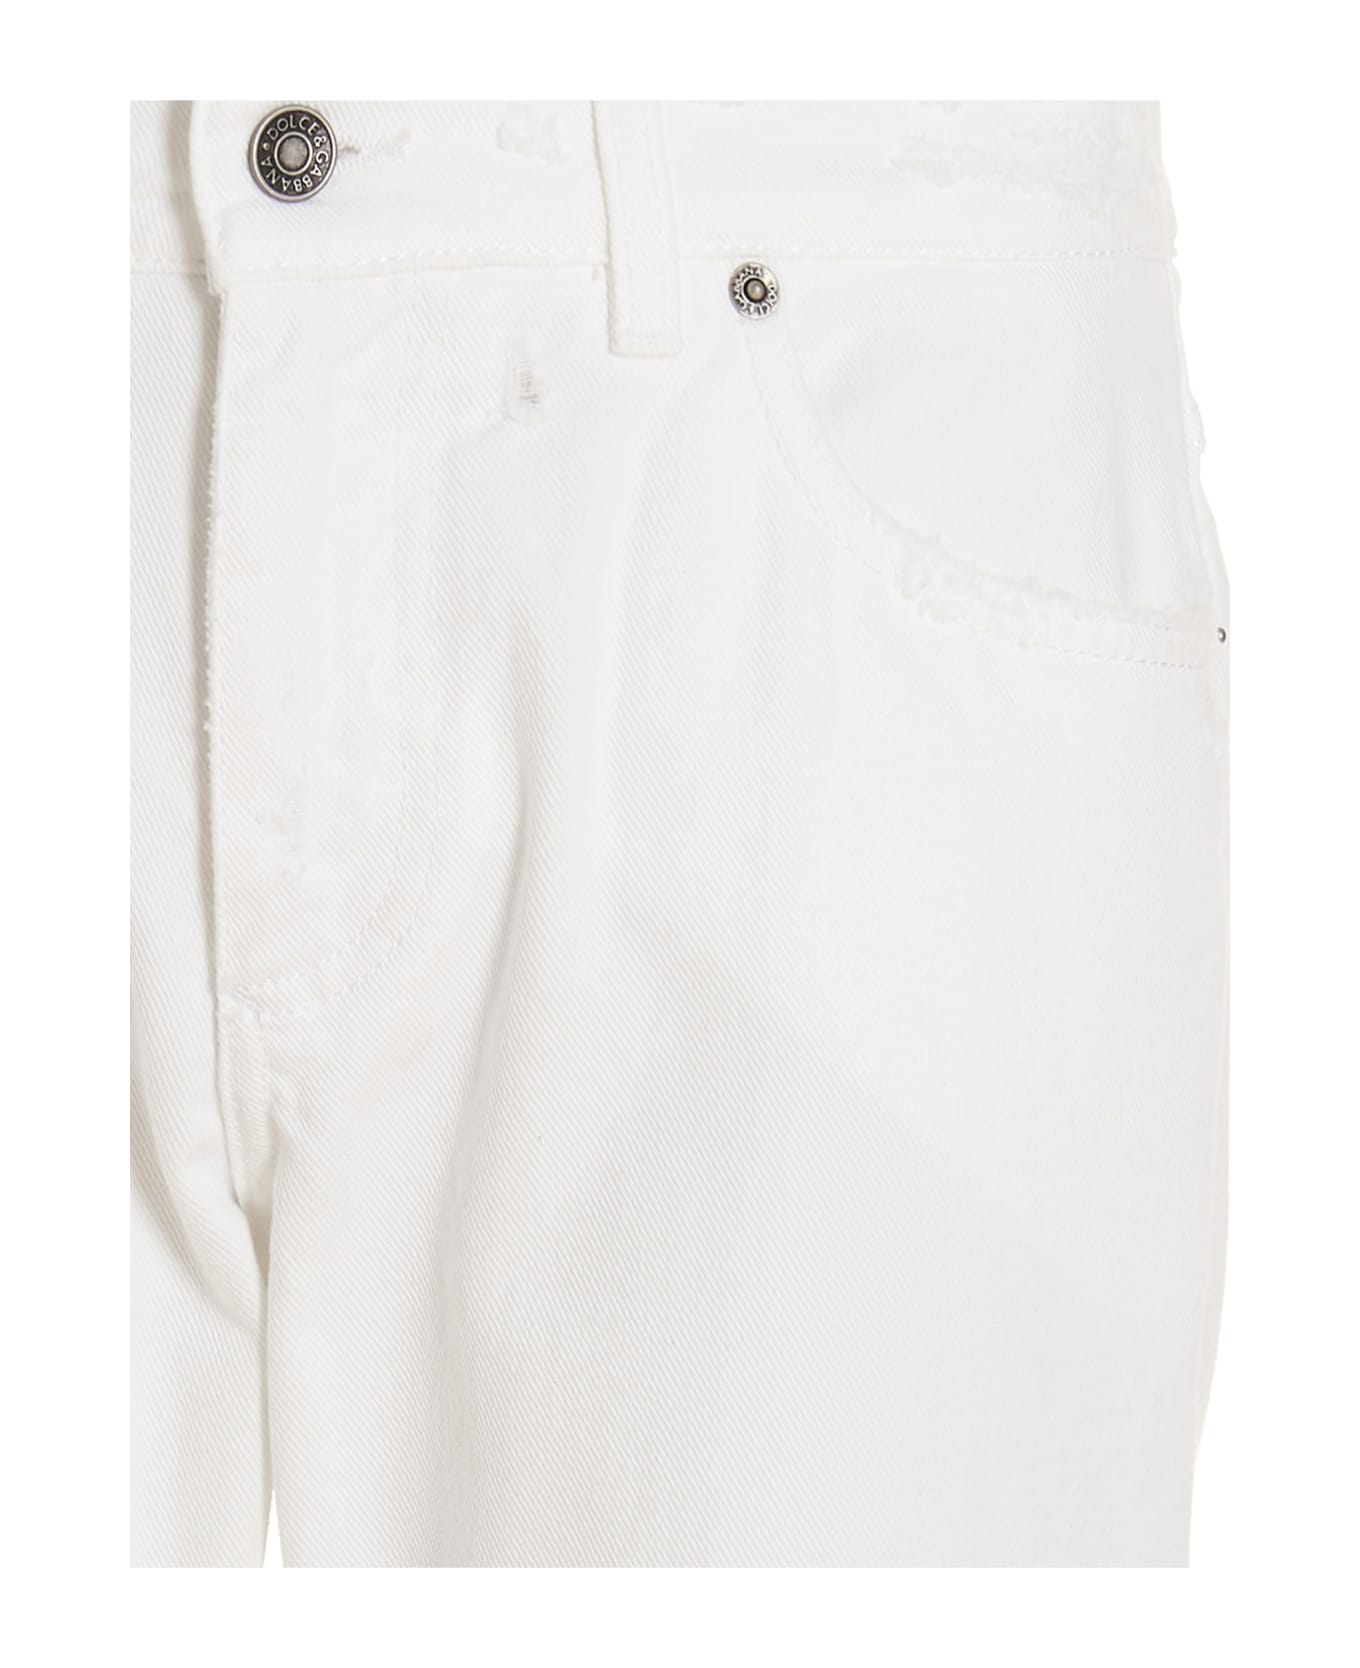 Dolce & Gabbana 're-edition S/s 2001' Jeans - White